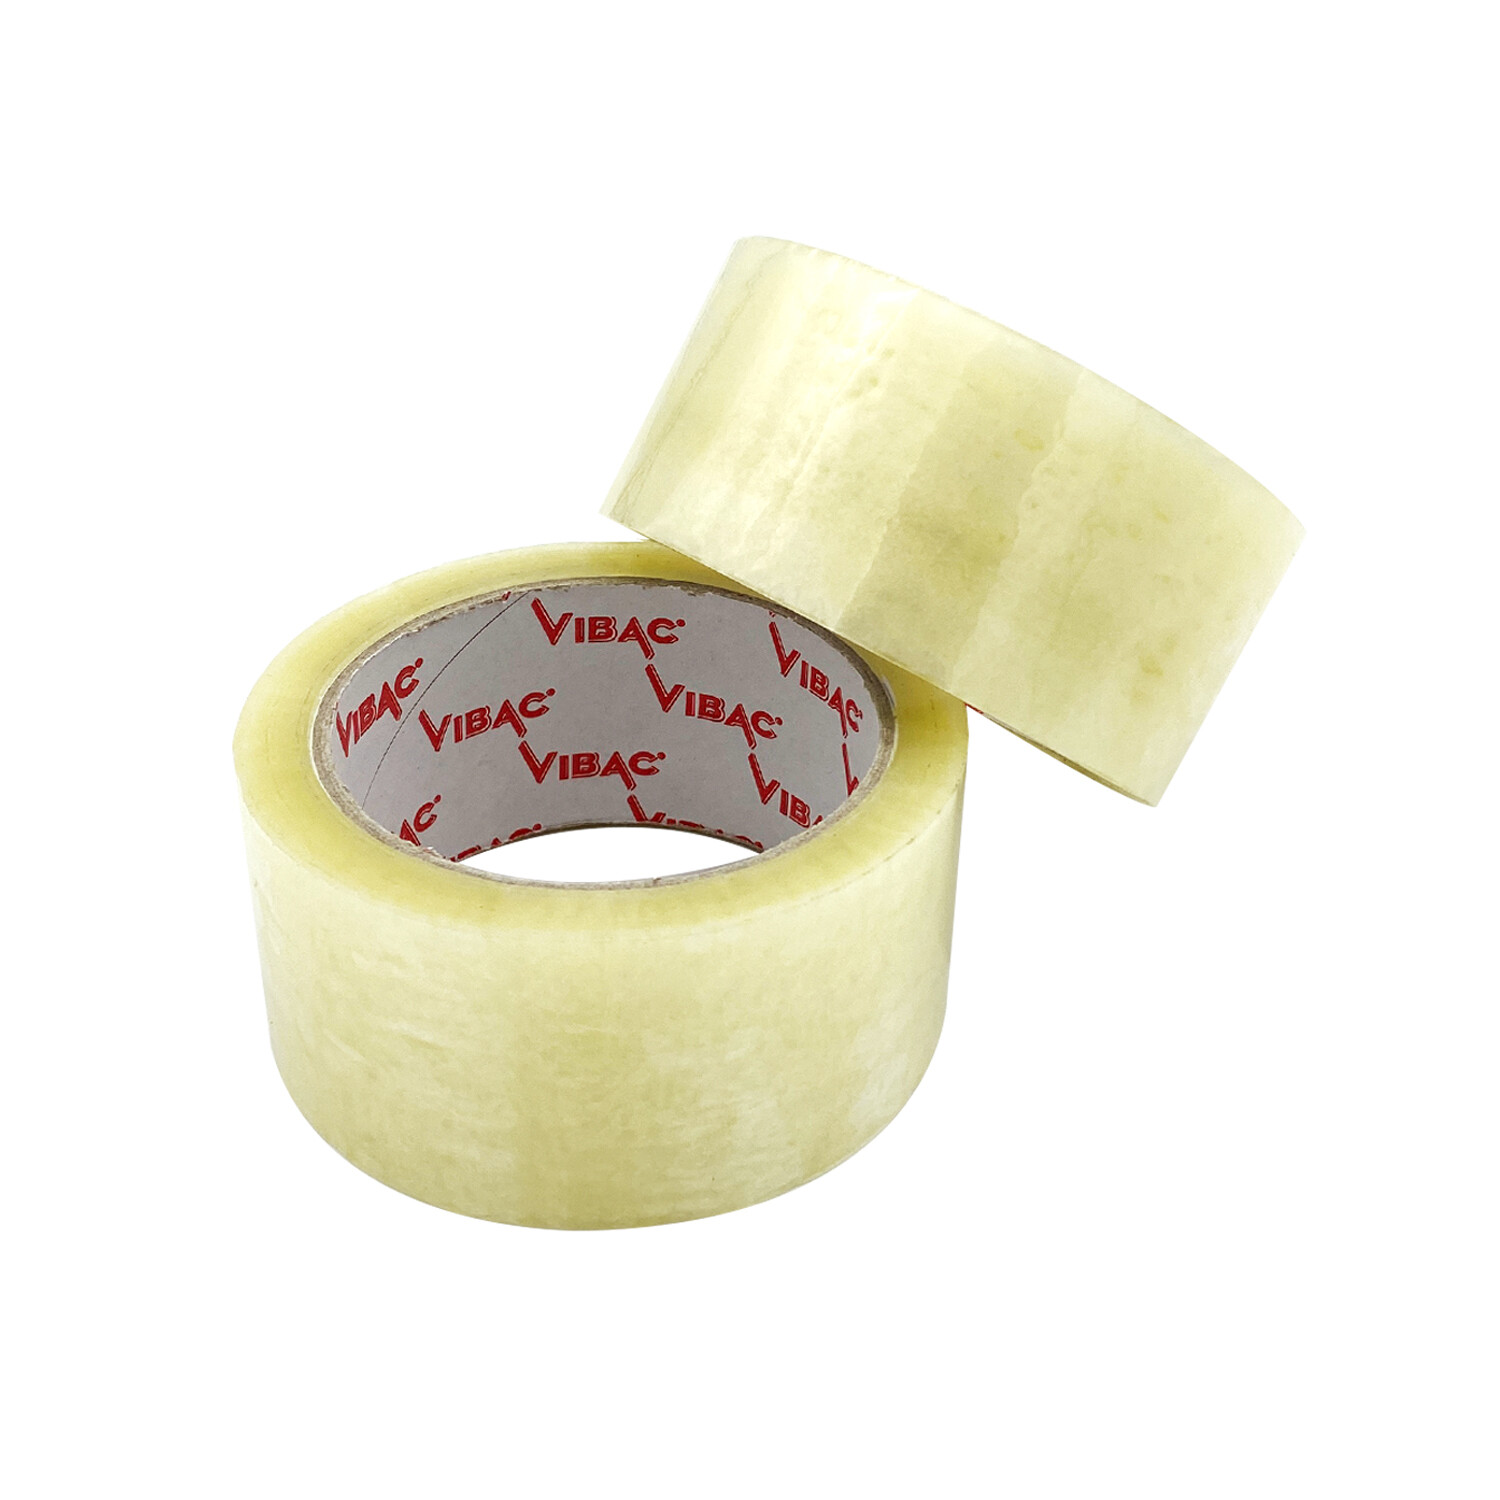 Strong Adhesive Strong Packing Tape 48mm x 66m Clear Vibac 3 Rolls 